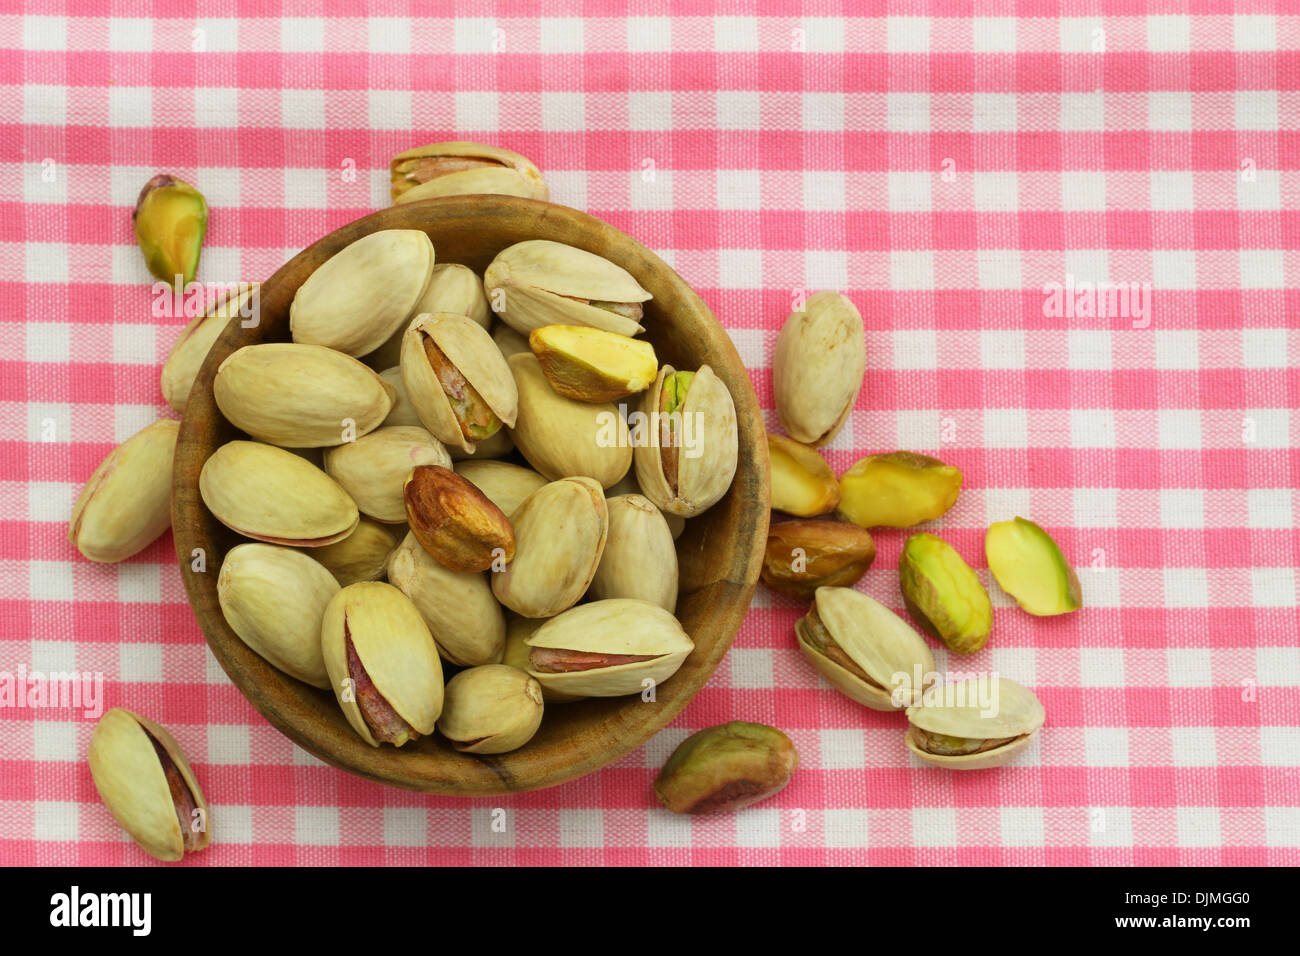 https://c8.alamy.com/comp/DJMGG0/pistachio-nuts-in-wooden-bowl-on-pink-checkered-cloth-with-copy-space-DJMGG0.jpg